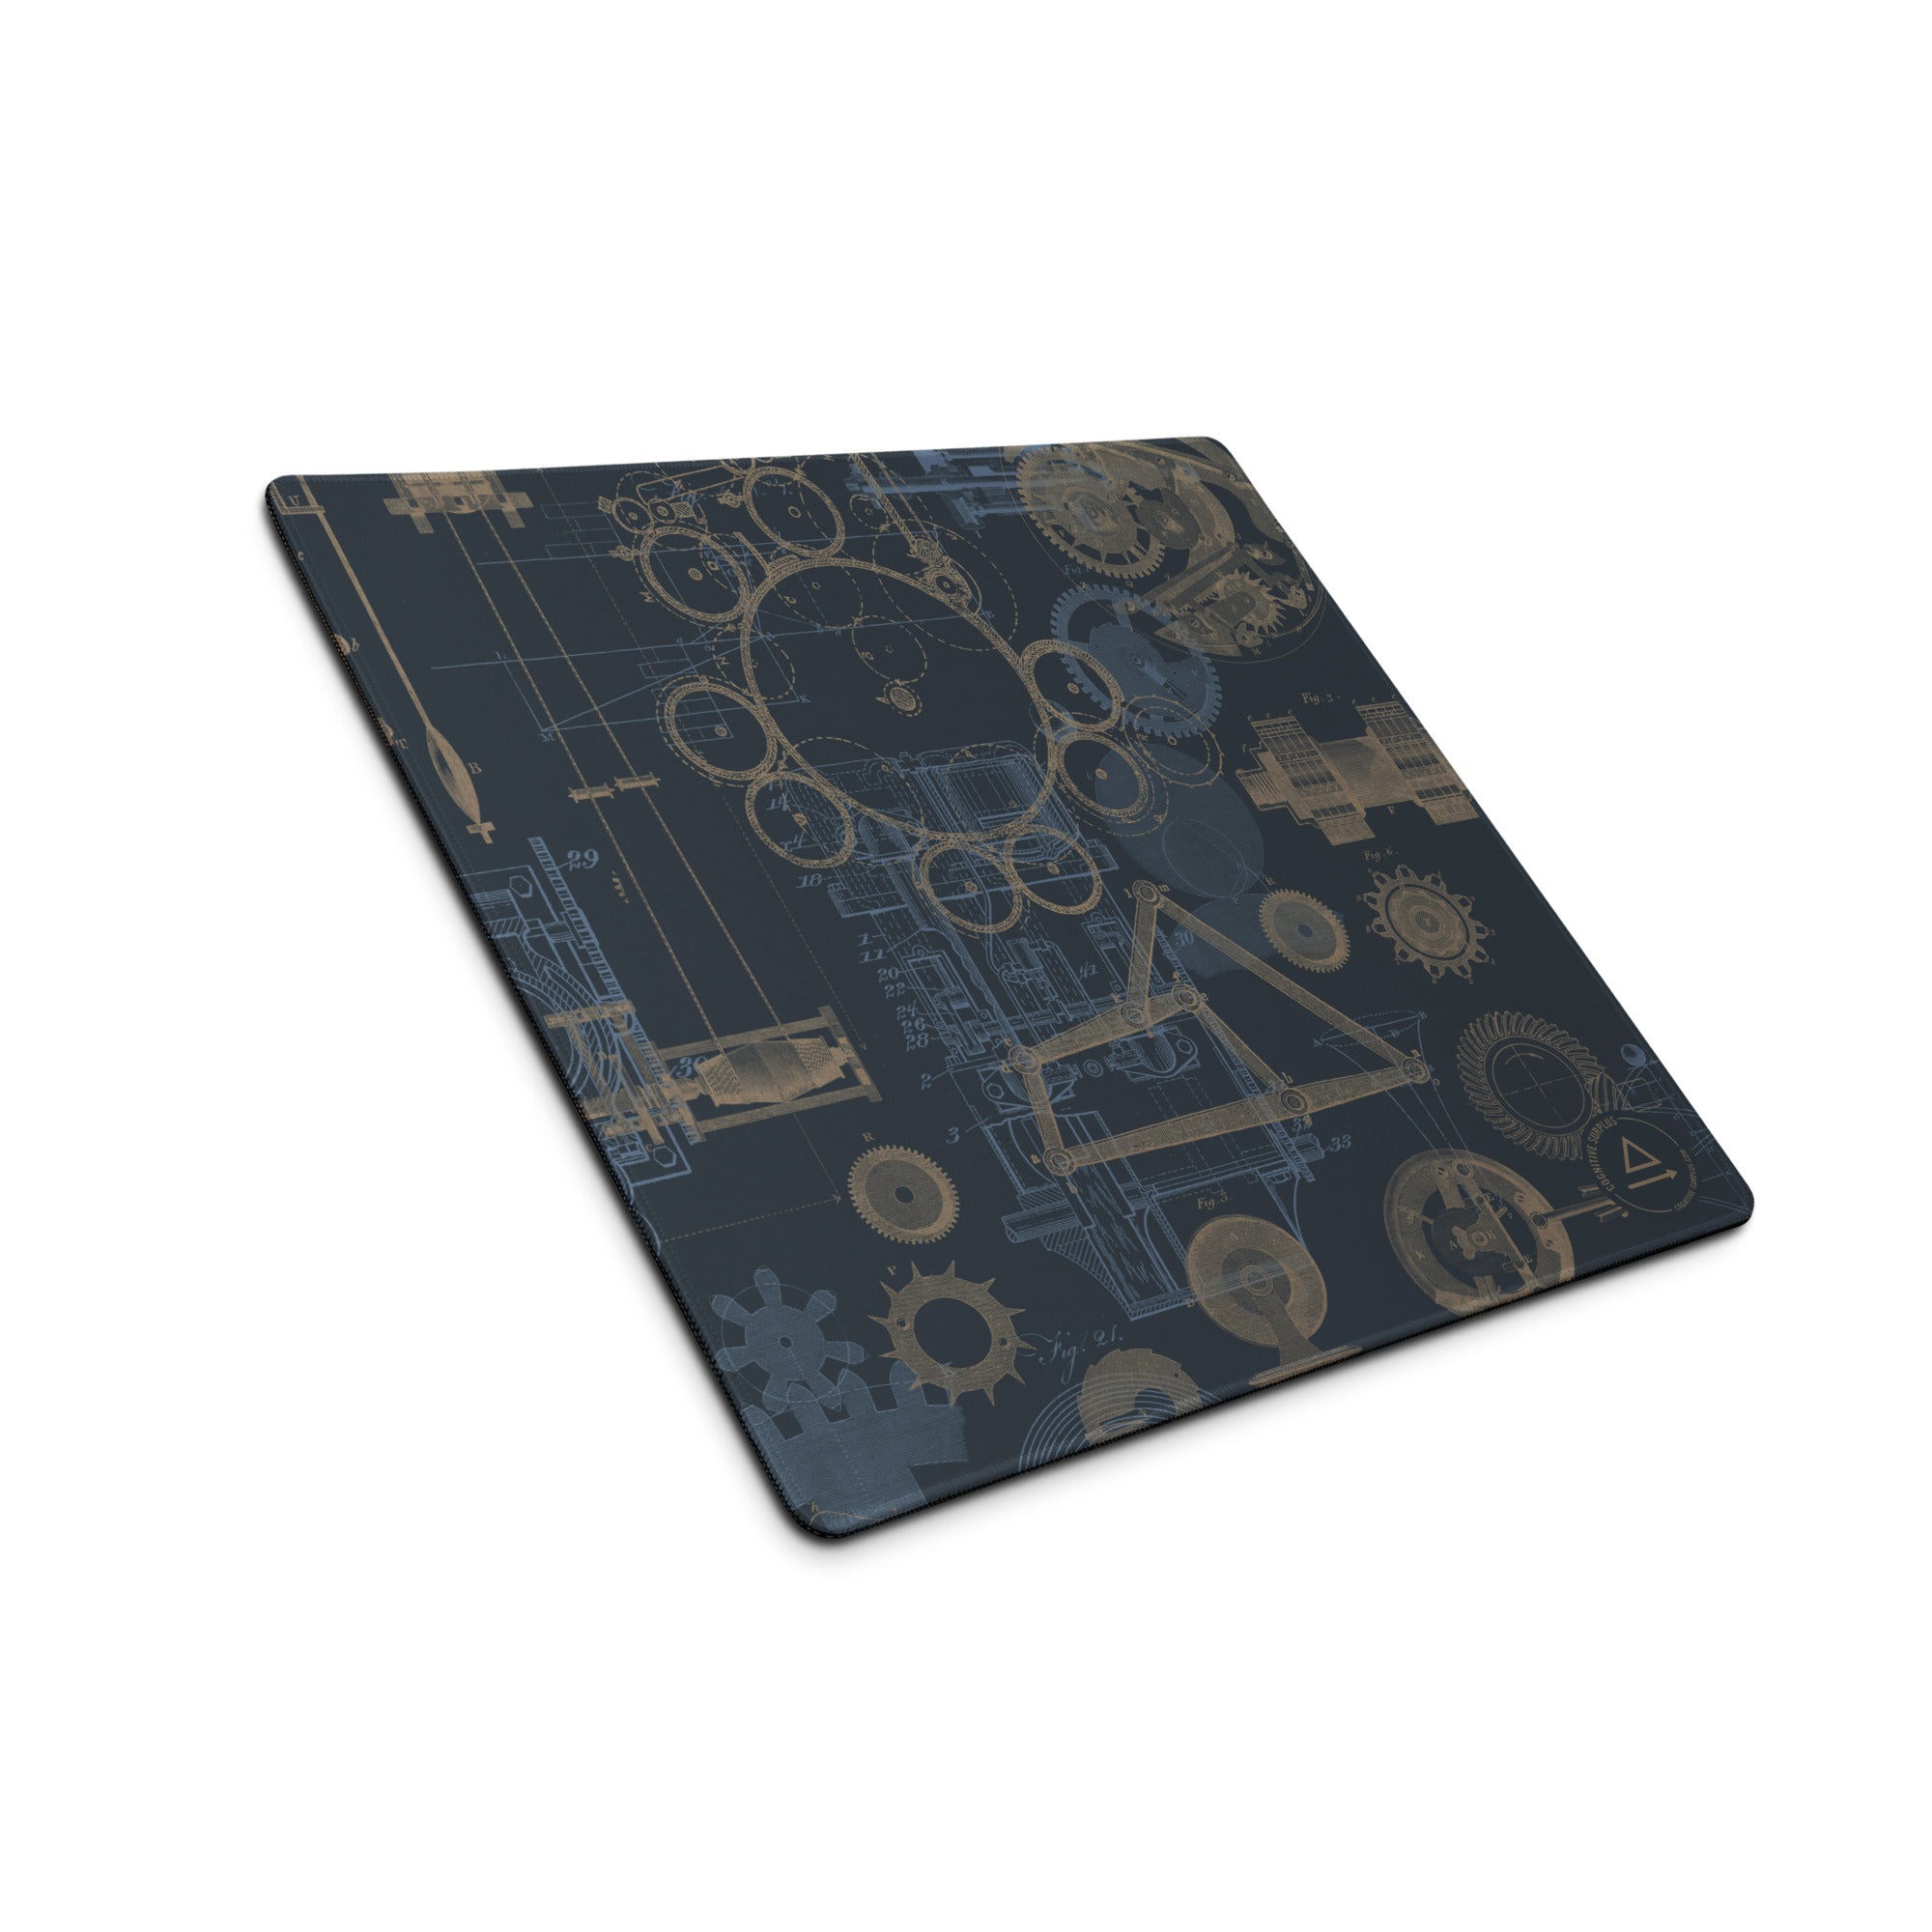 gaming-mouse-pad-white-18x16-front-6595e614dfd0b.jpg